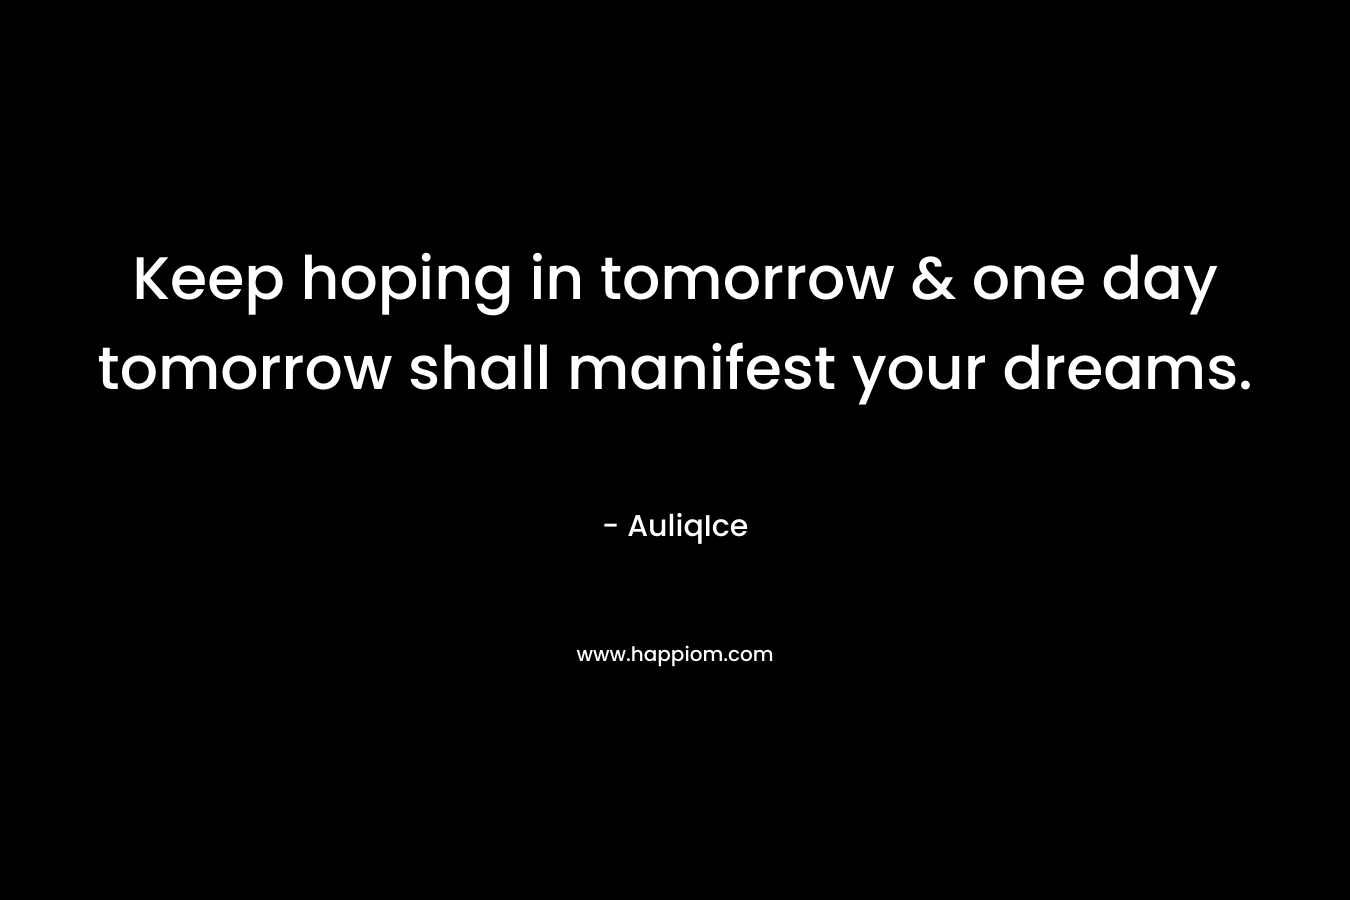 Keep hoping in tomorrow & one day tomorrow shall manifest your dreams.